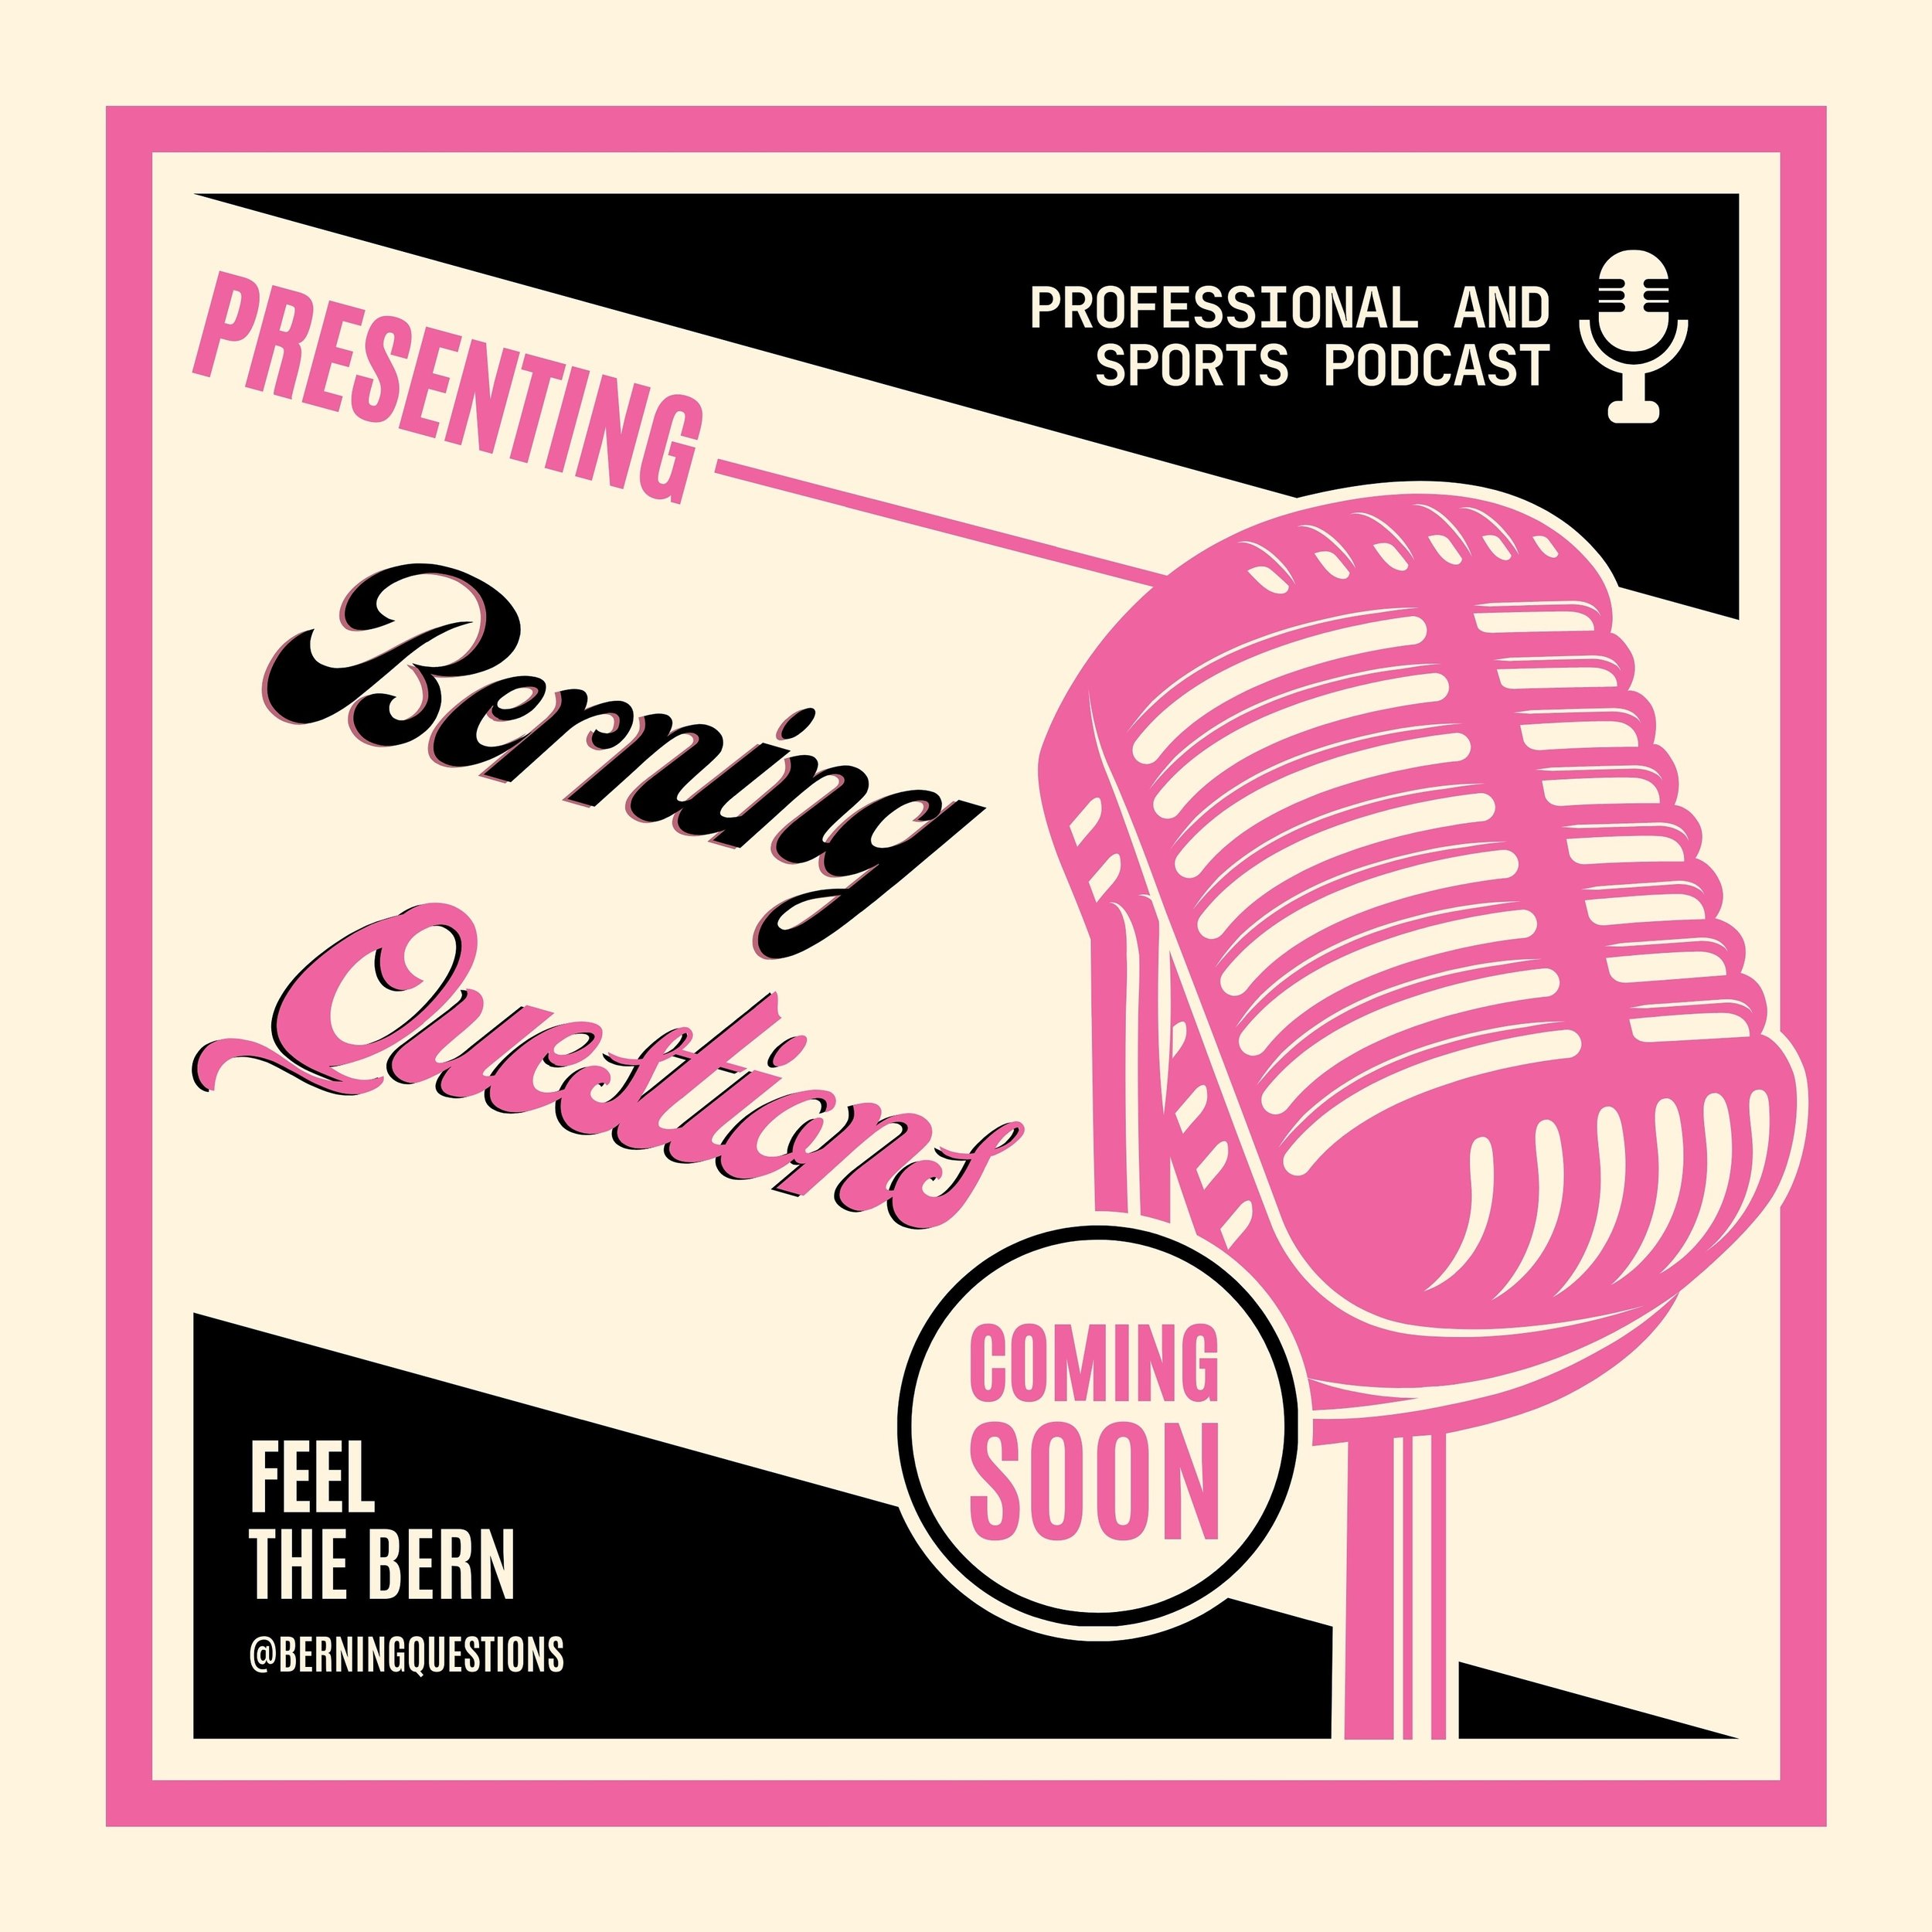 S2:E2 coming soon! 🔥

Super excited to be back and share this one. We&rsquo;ll be diving in on how our host learned to film and edit spanning back almost a decade ago. Answering the Berning Question of how?! 

Tune in on a very important day coming 